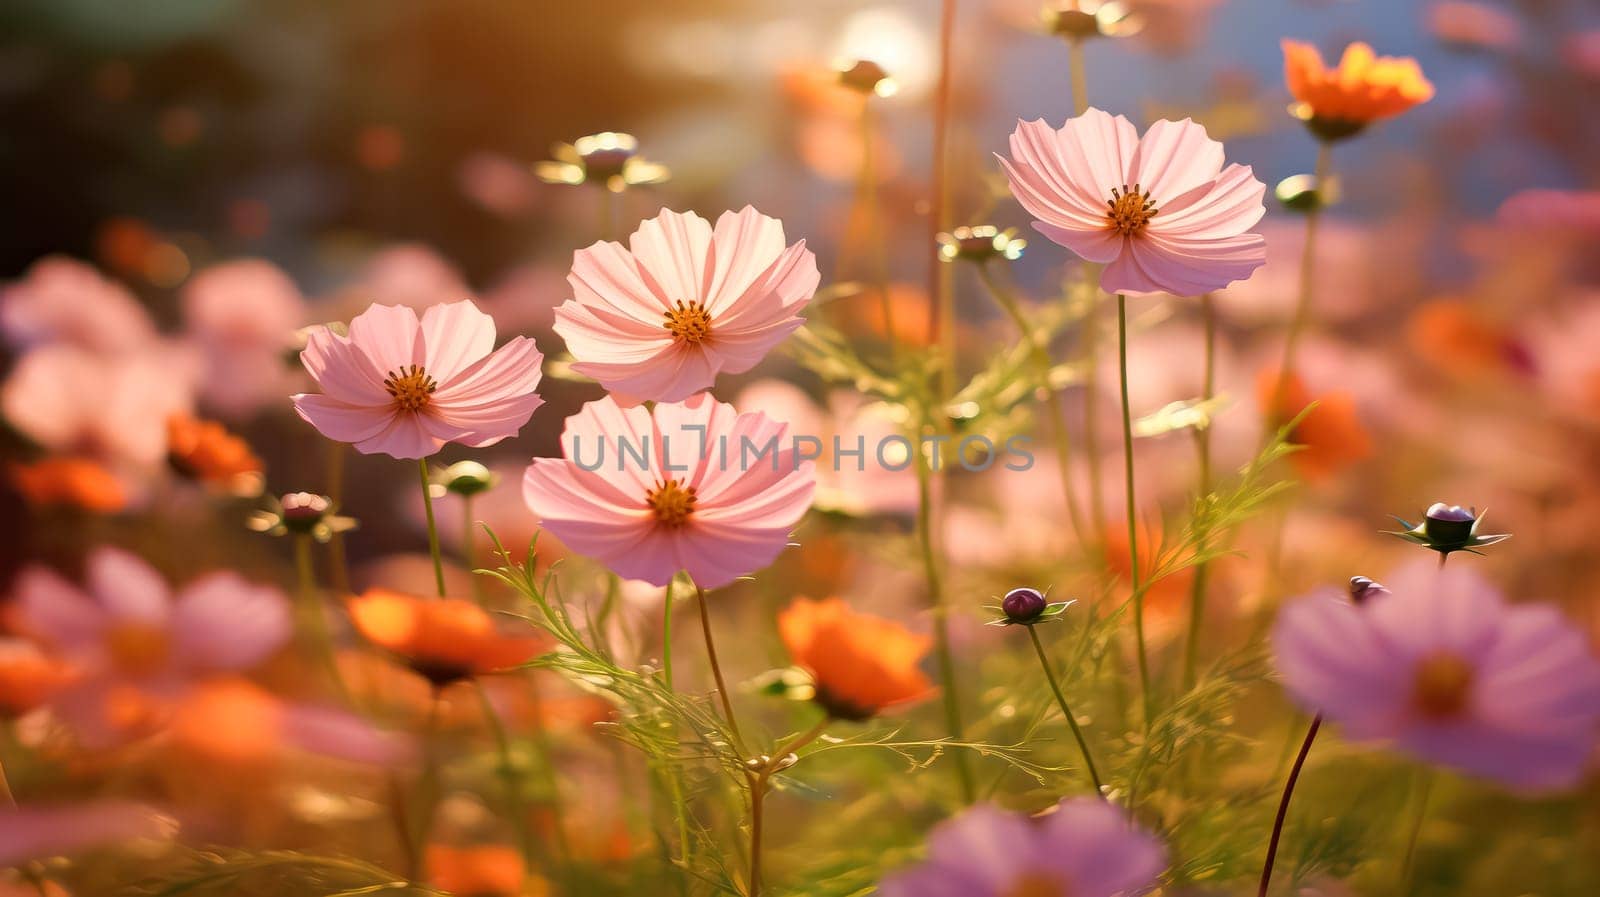 Vibrant cosmos flowers bloom gracefully in the garden, showcasing their beauty and adding a burst of color to natures canvas. Summer joy captured in petals.